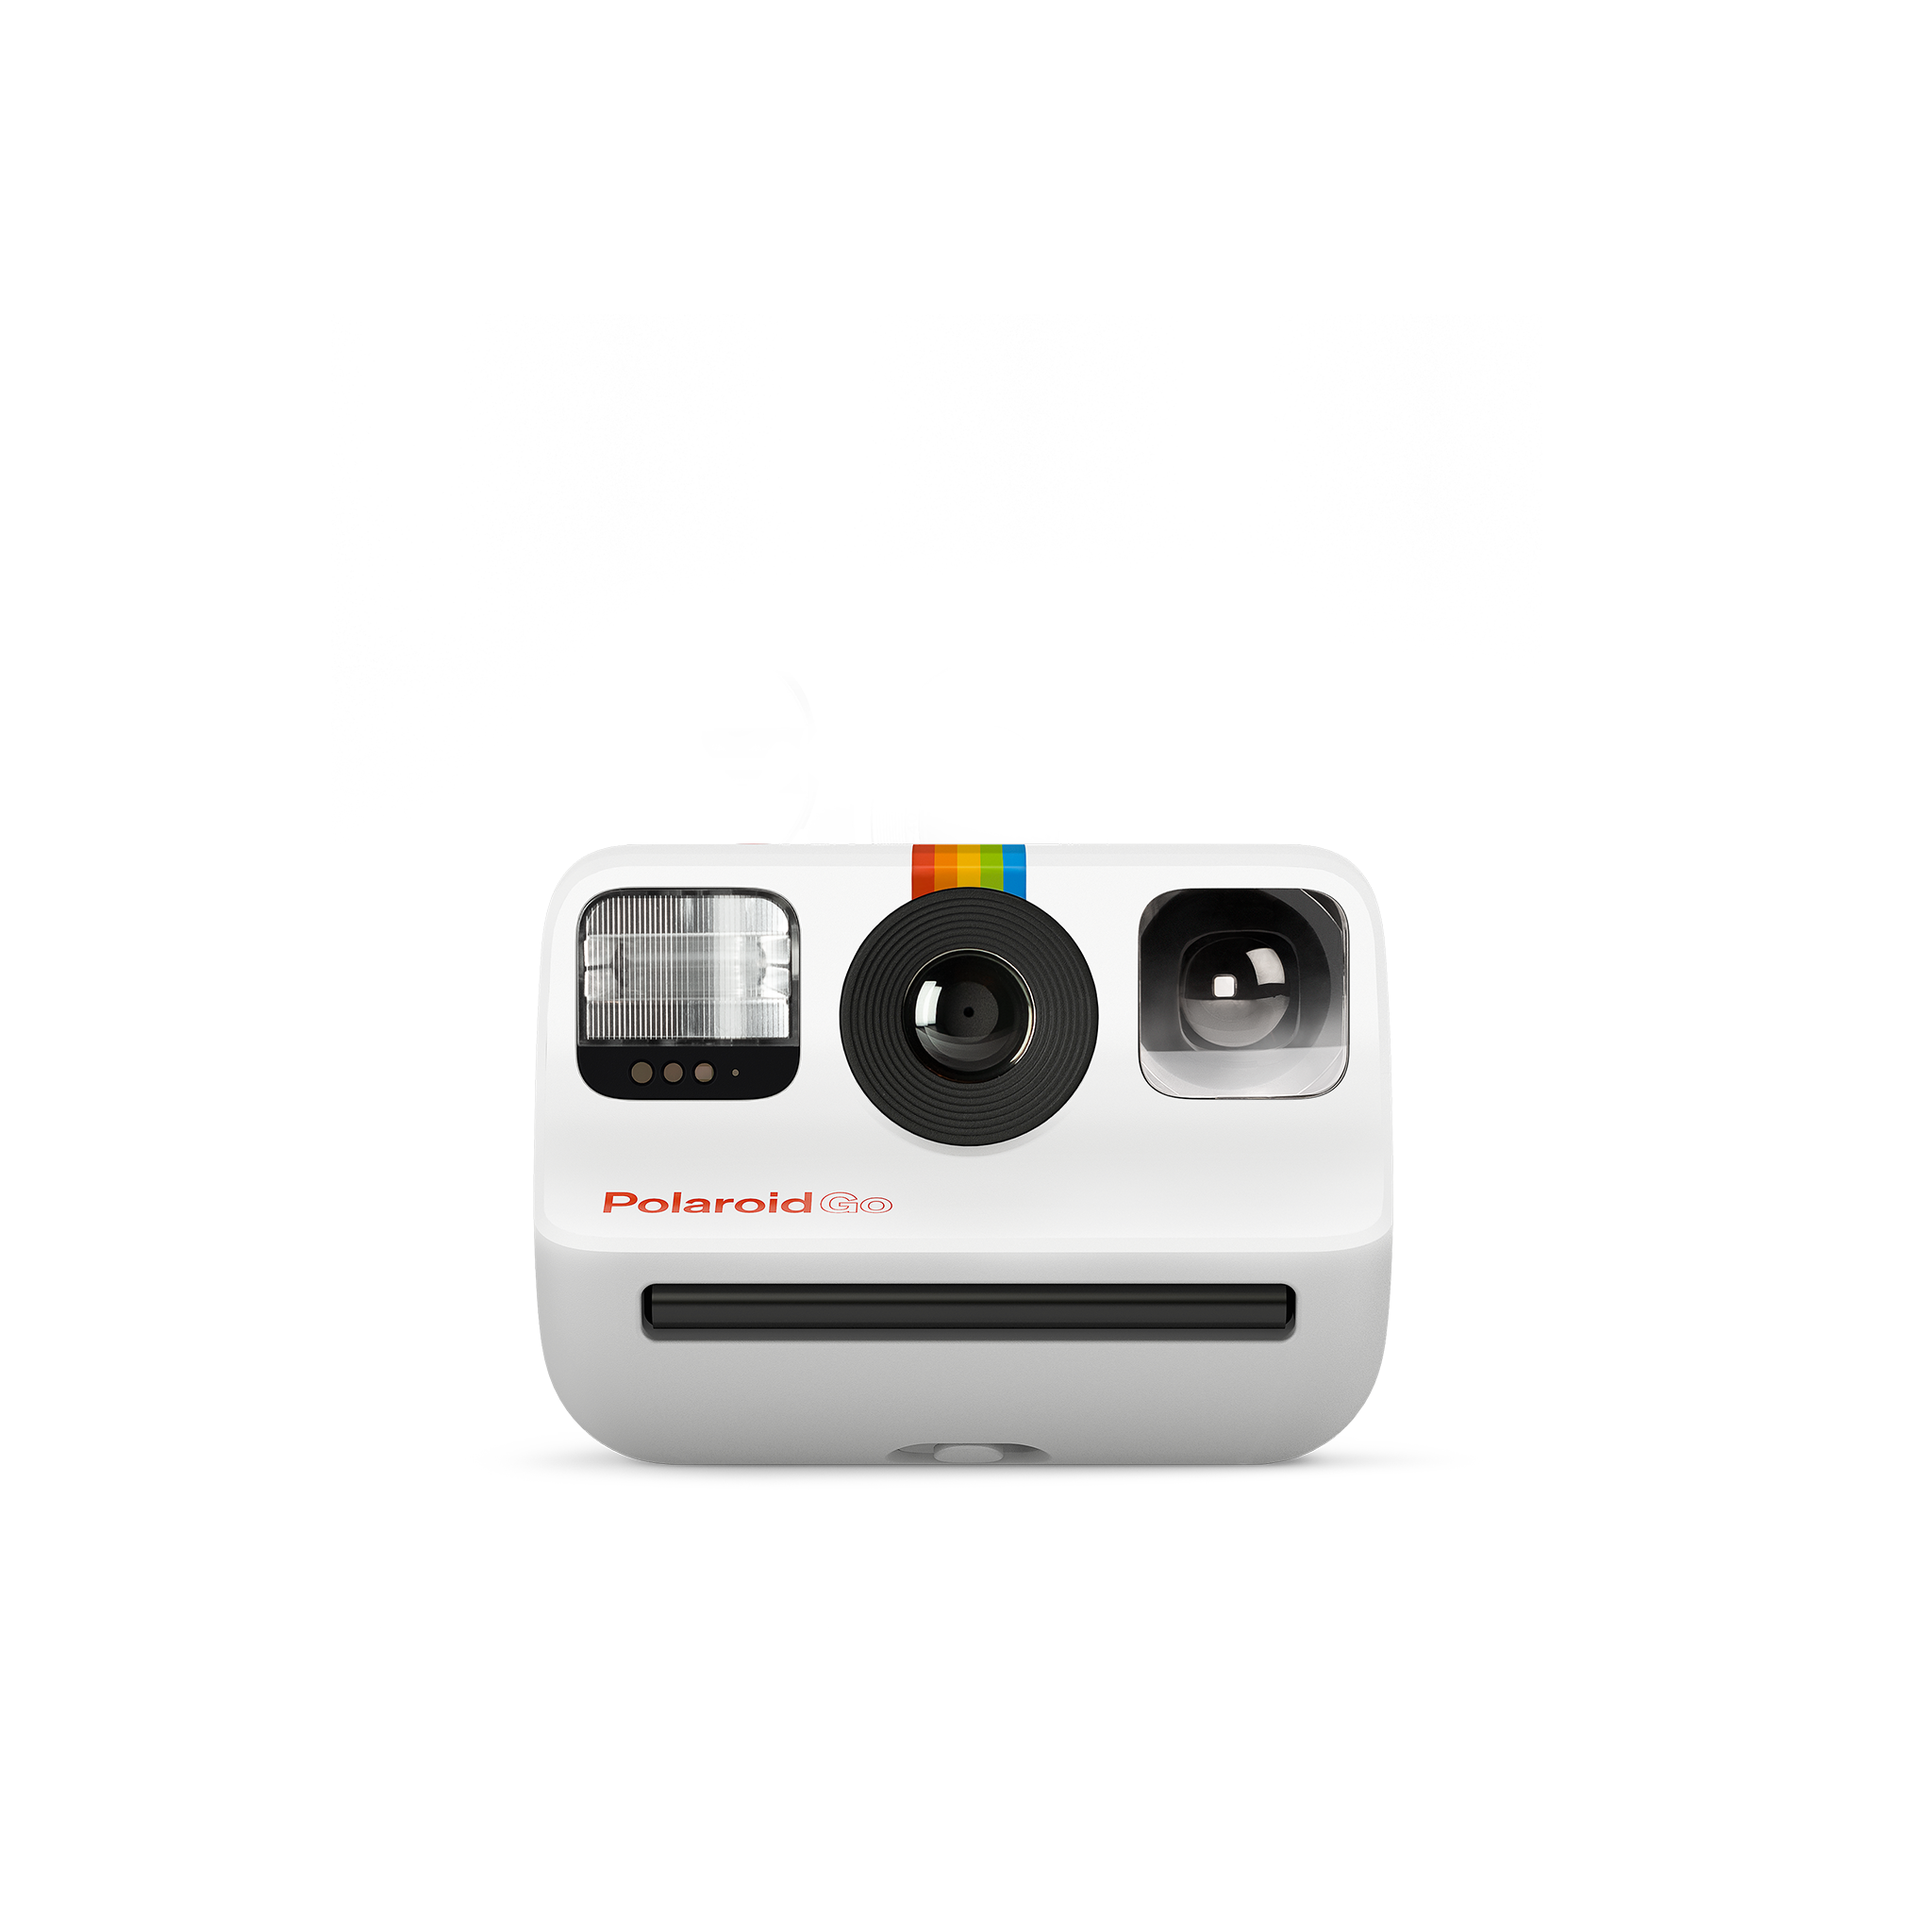 image_go_polaroid_camera_009035_front (1).png